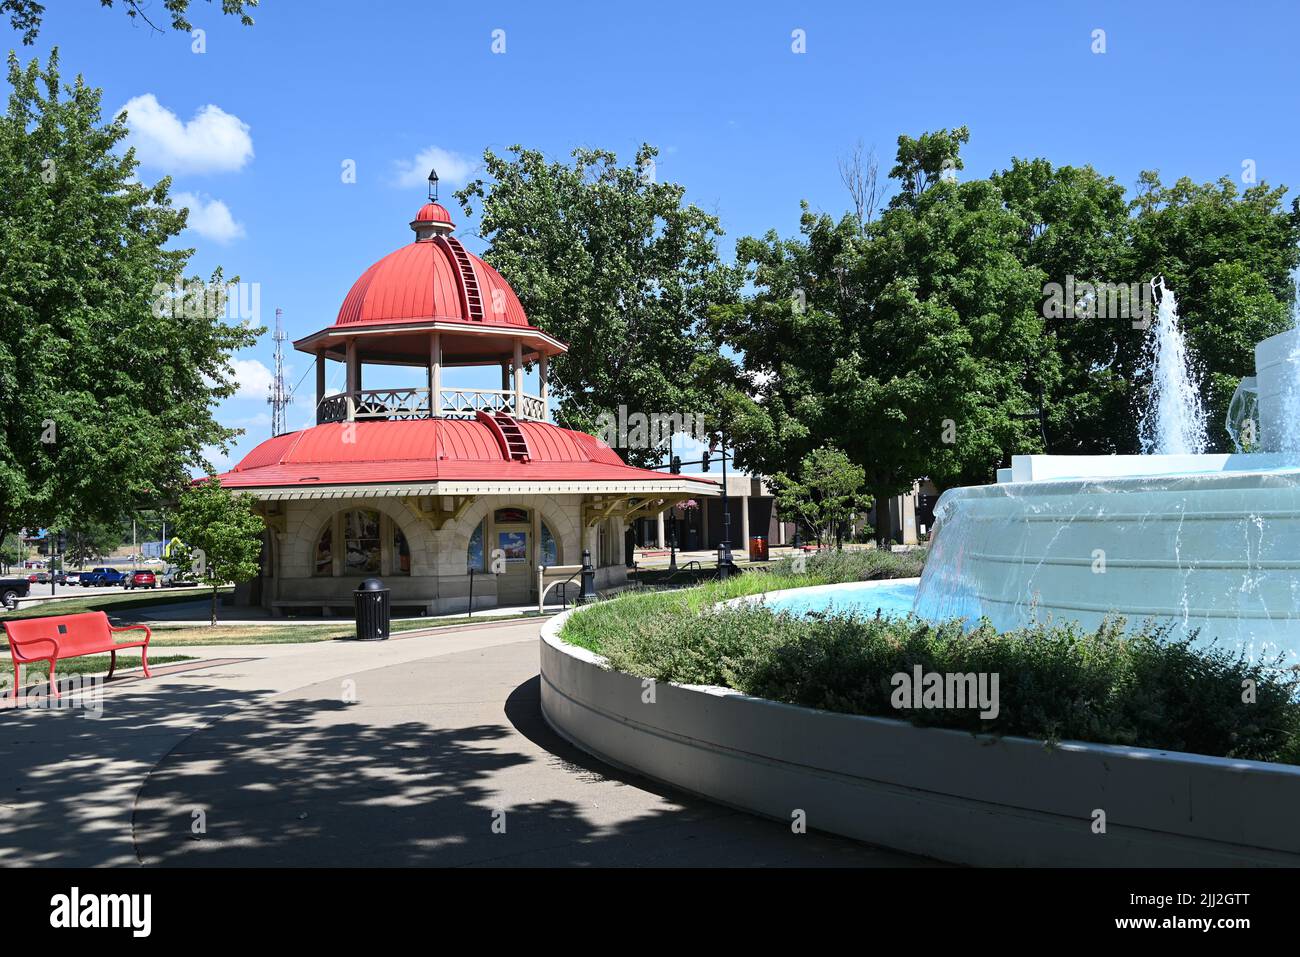 The Decatur Transfer House, built as a transit shelter in 1896 and moved to Central Park in 1962, is the unofficial symbol for the city. Stock Photo